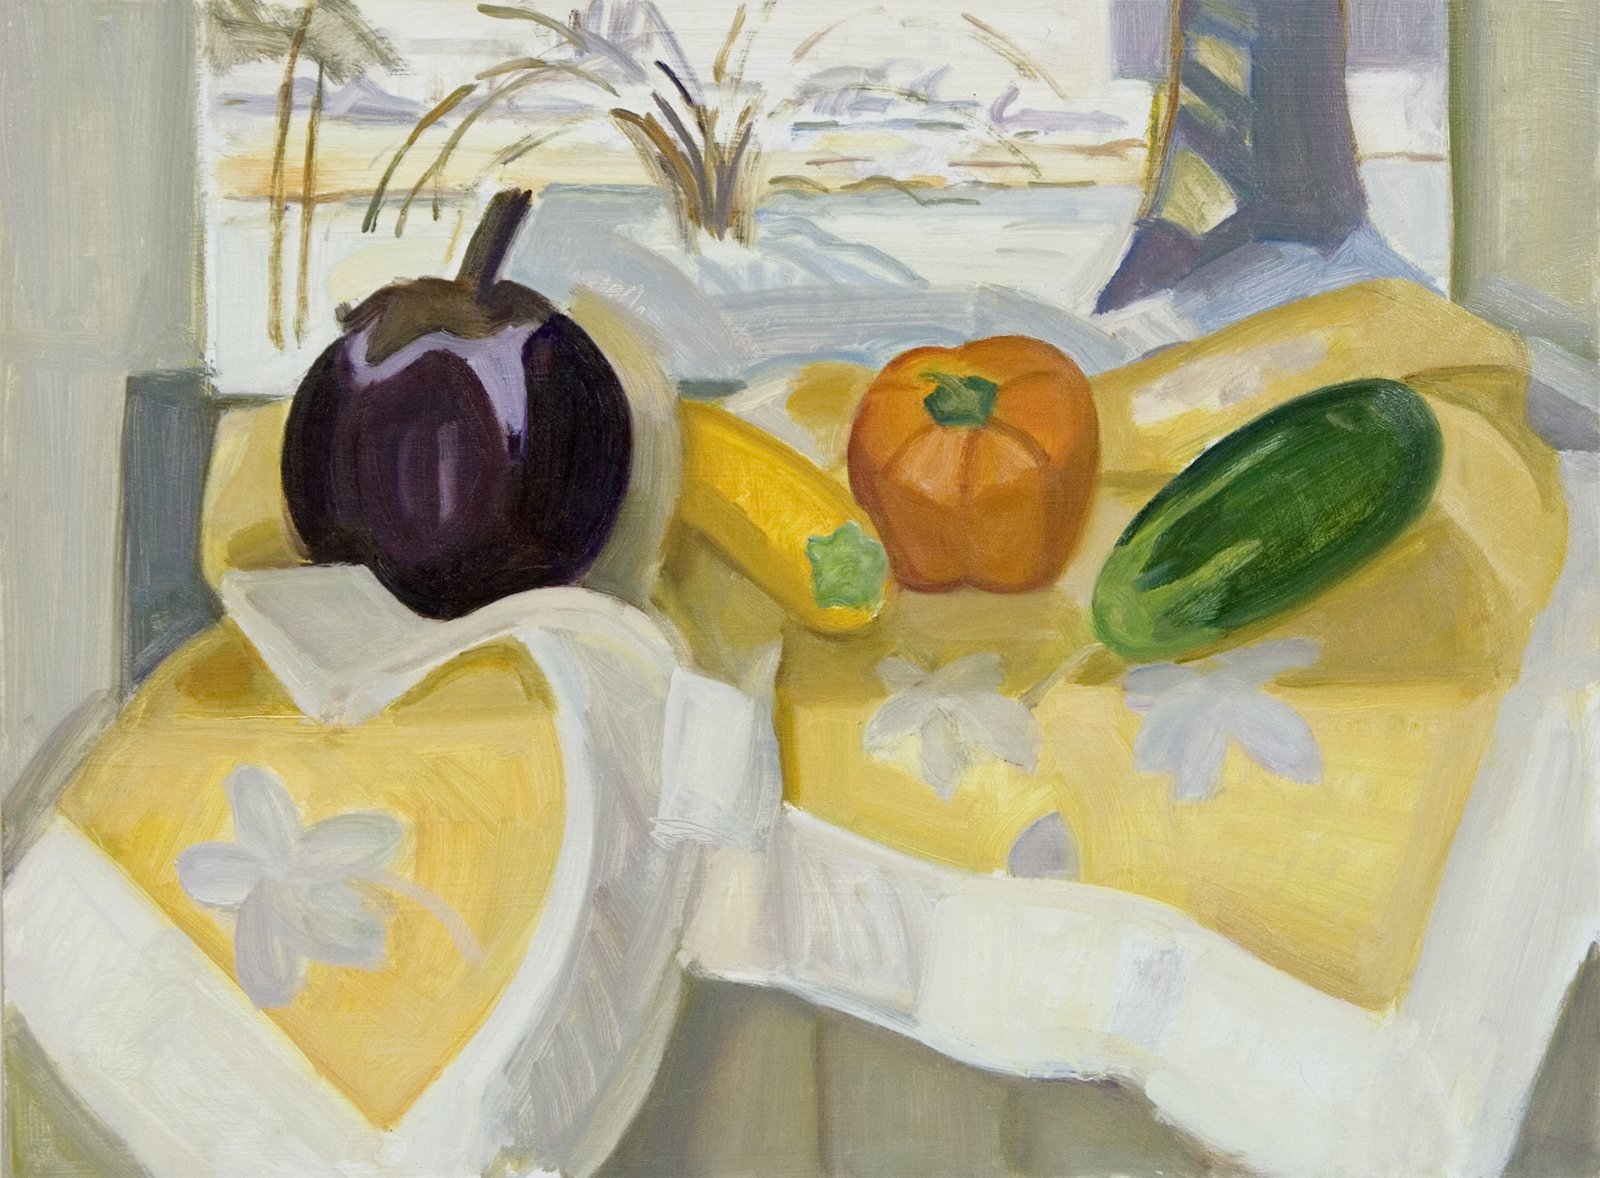   Round Eggplant, Cucumber, Winter Landscape , 2009, oil/panel, 14 x 19 in.  (Private collection)  